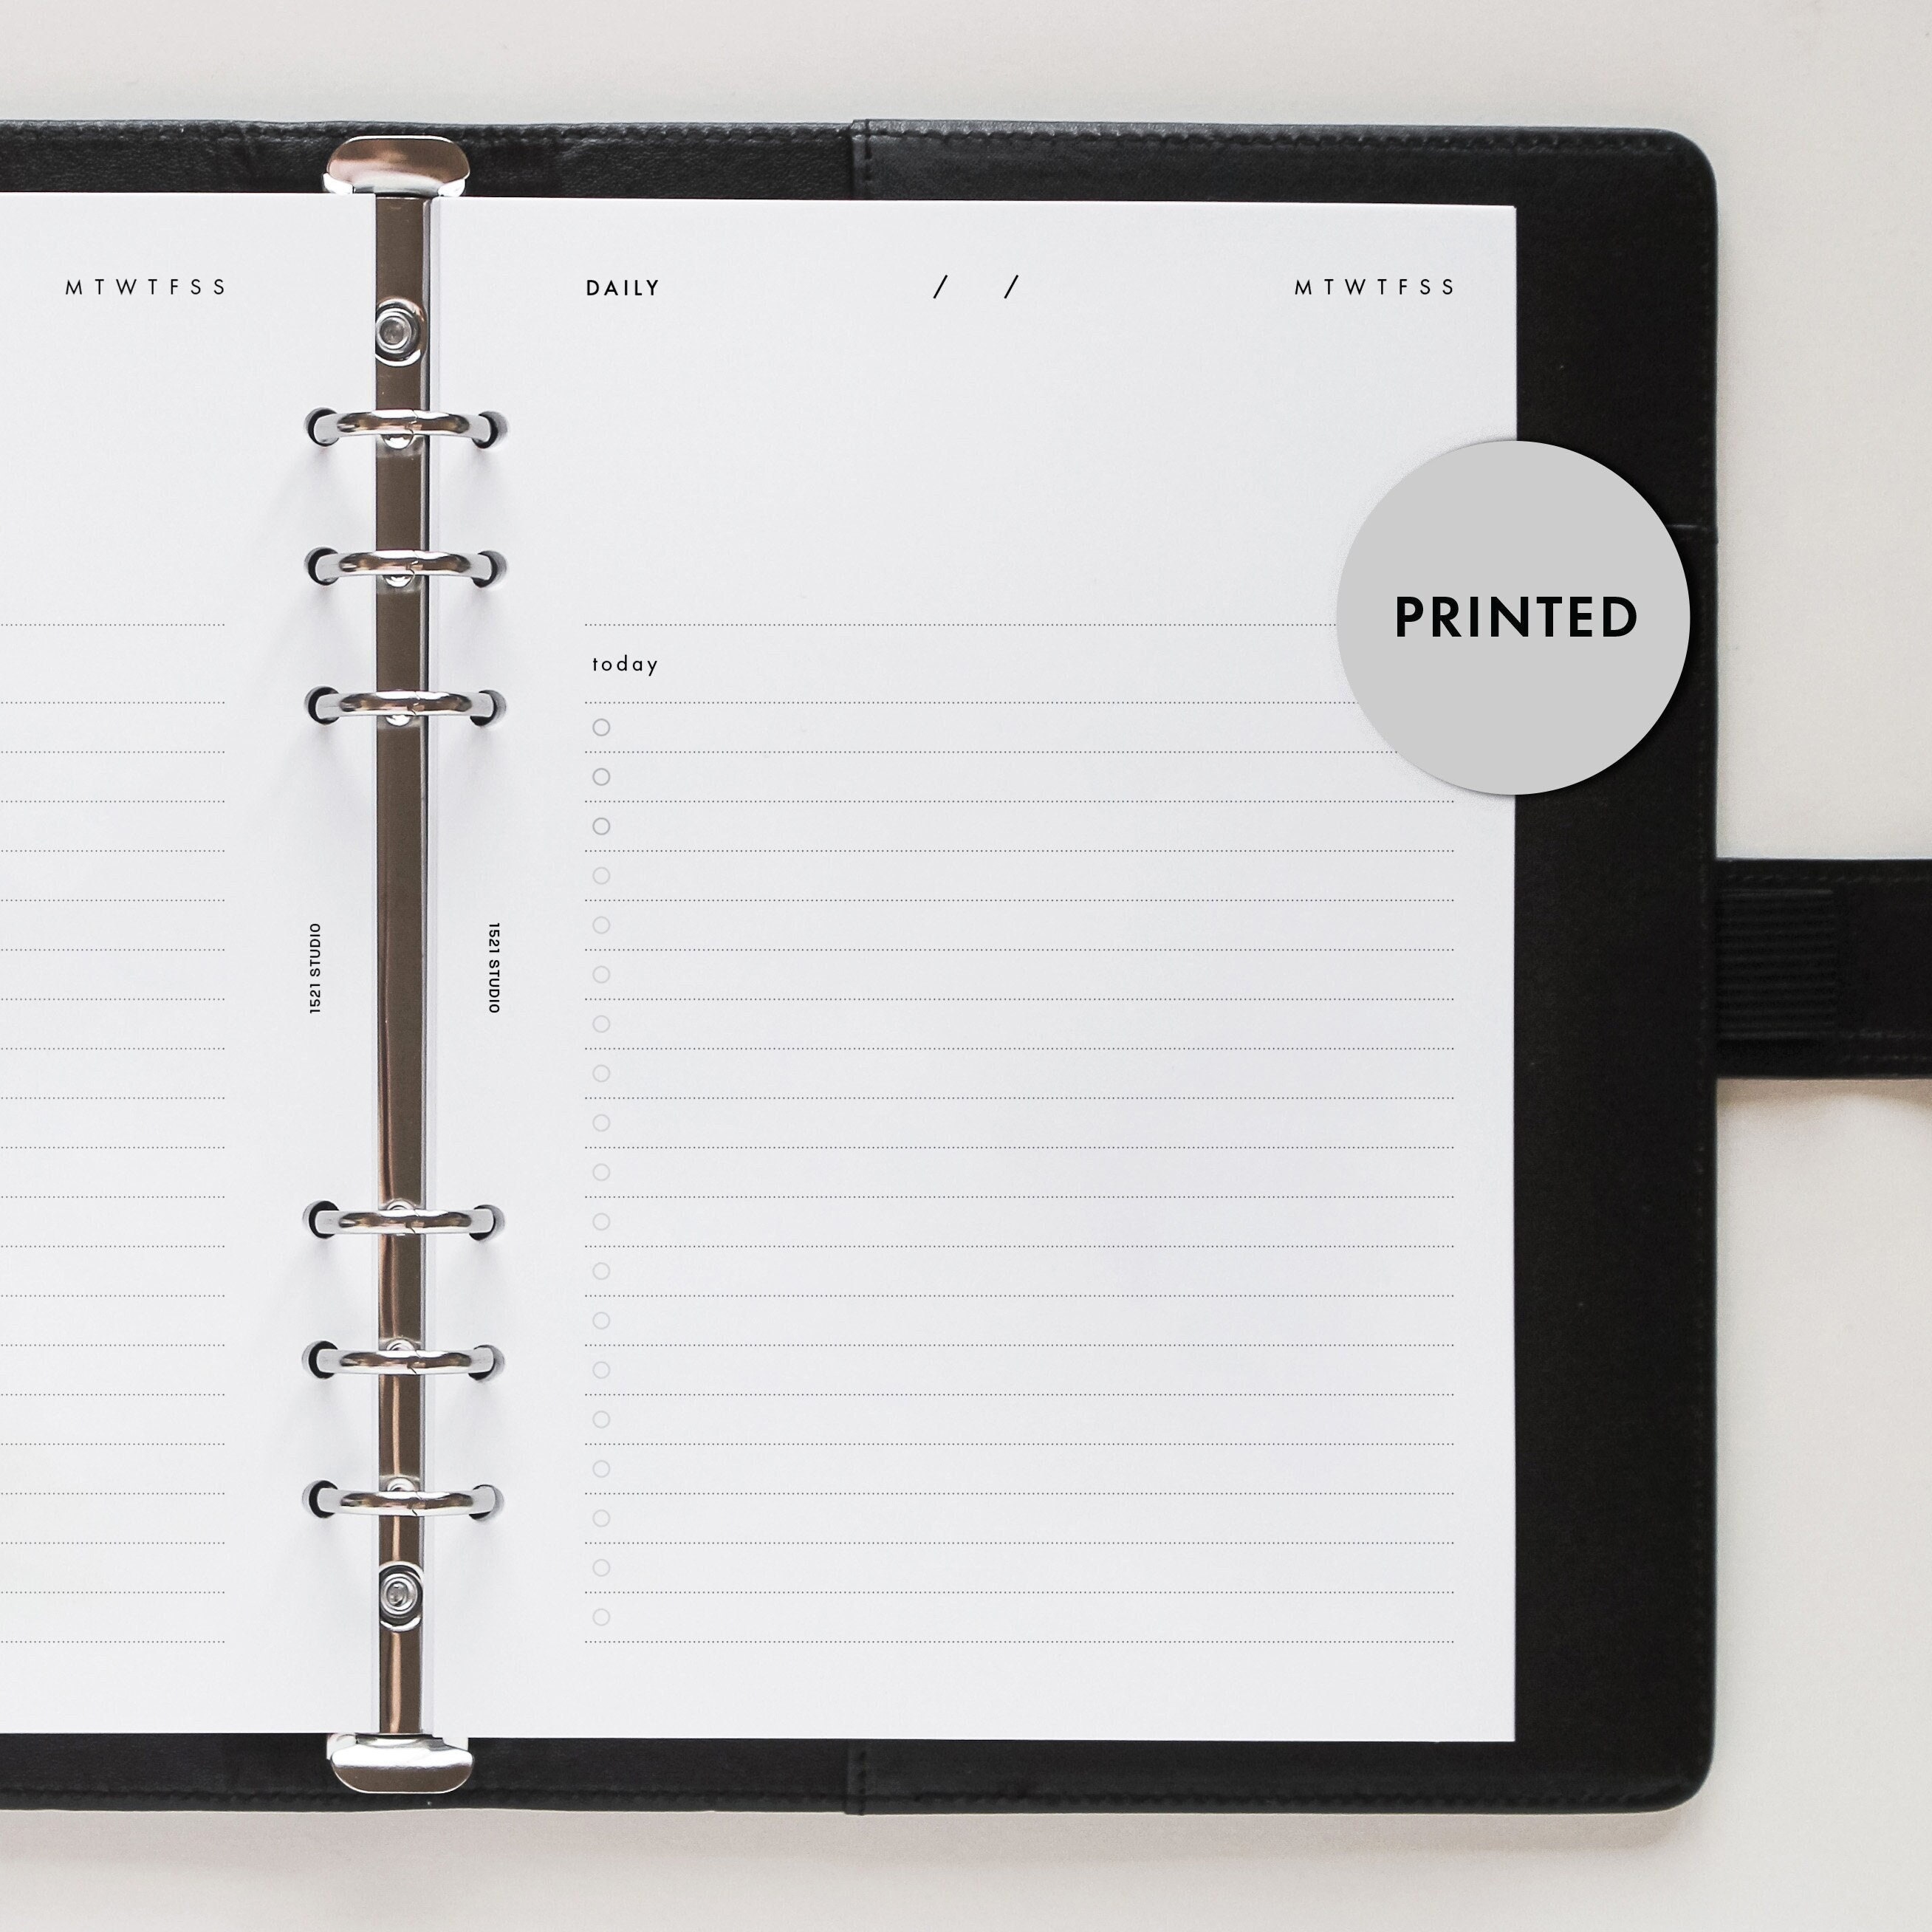 Daily Planner Inserts Monochrome Style - for A5 planners printed in  Australia. - Planner Peace